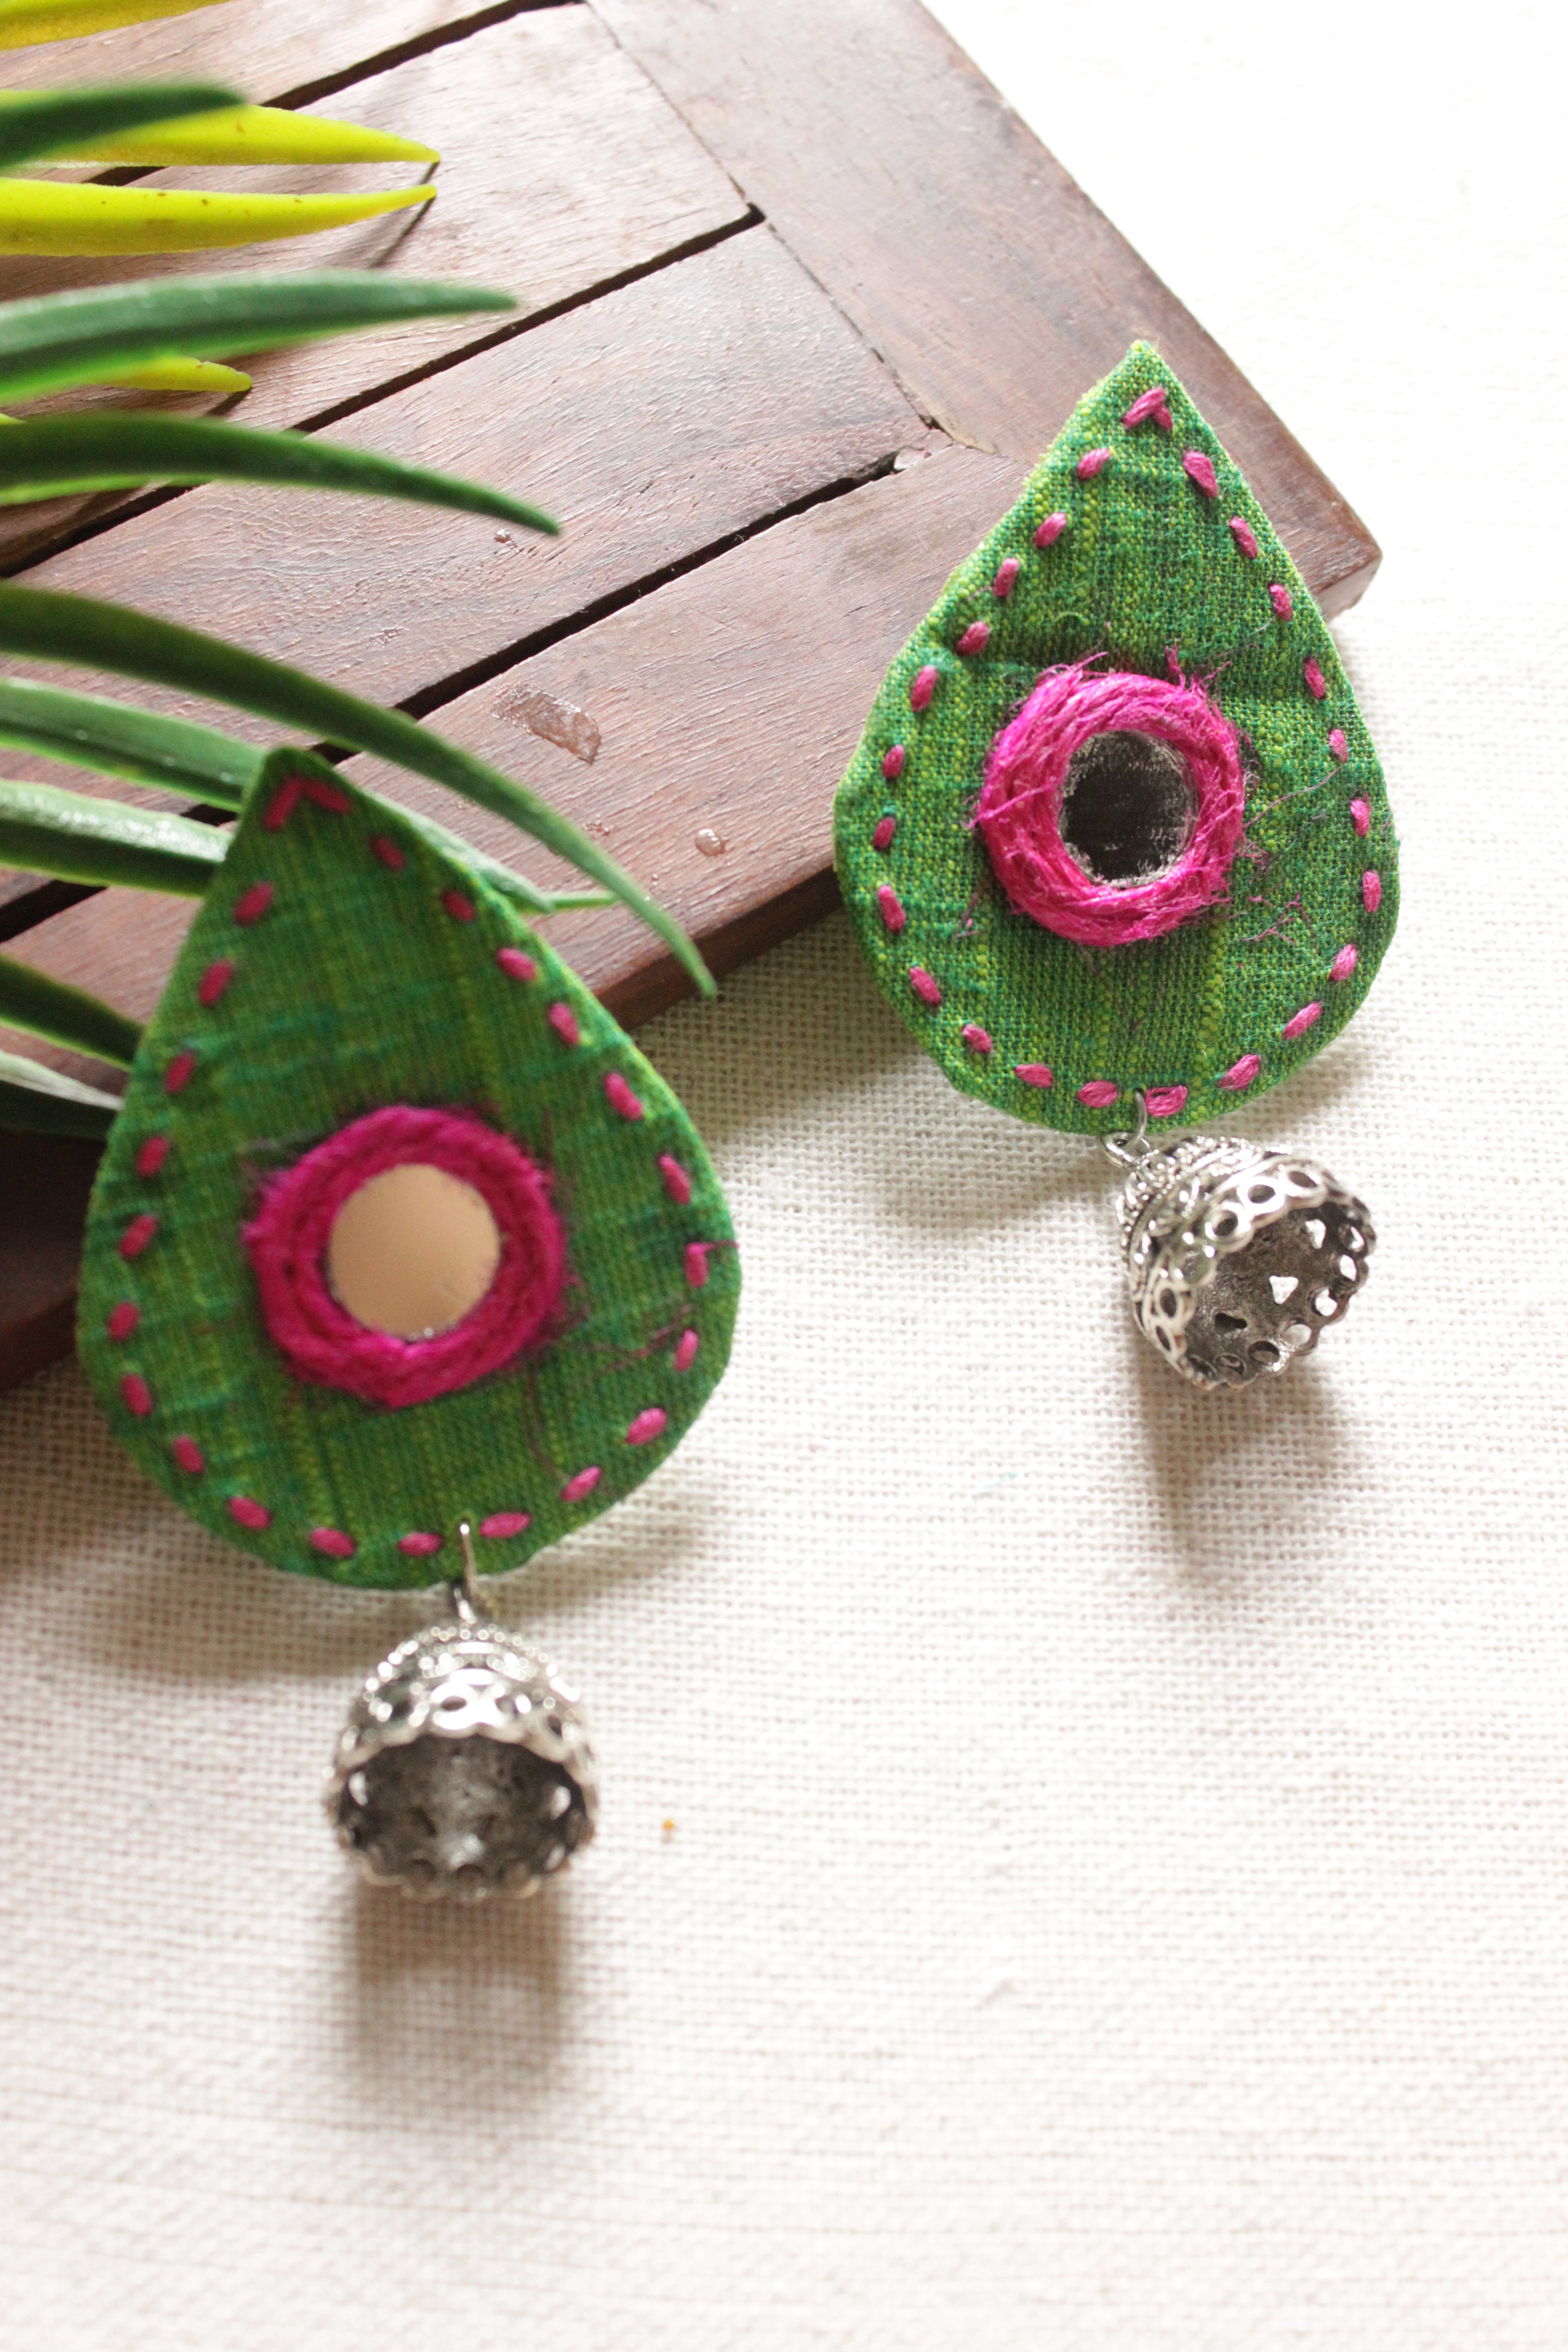 Parrot Green and Pink Hand Embroidered Jhumka Earrings